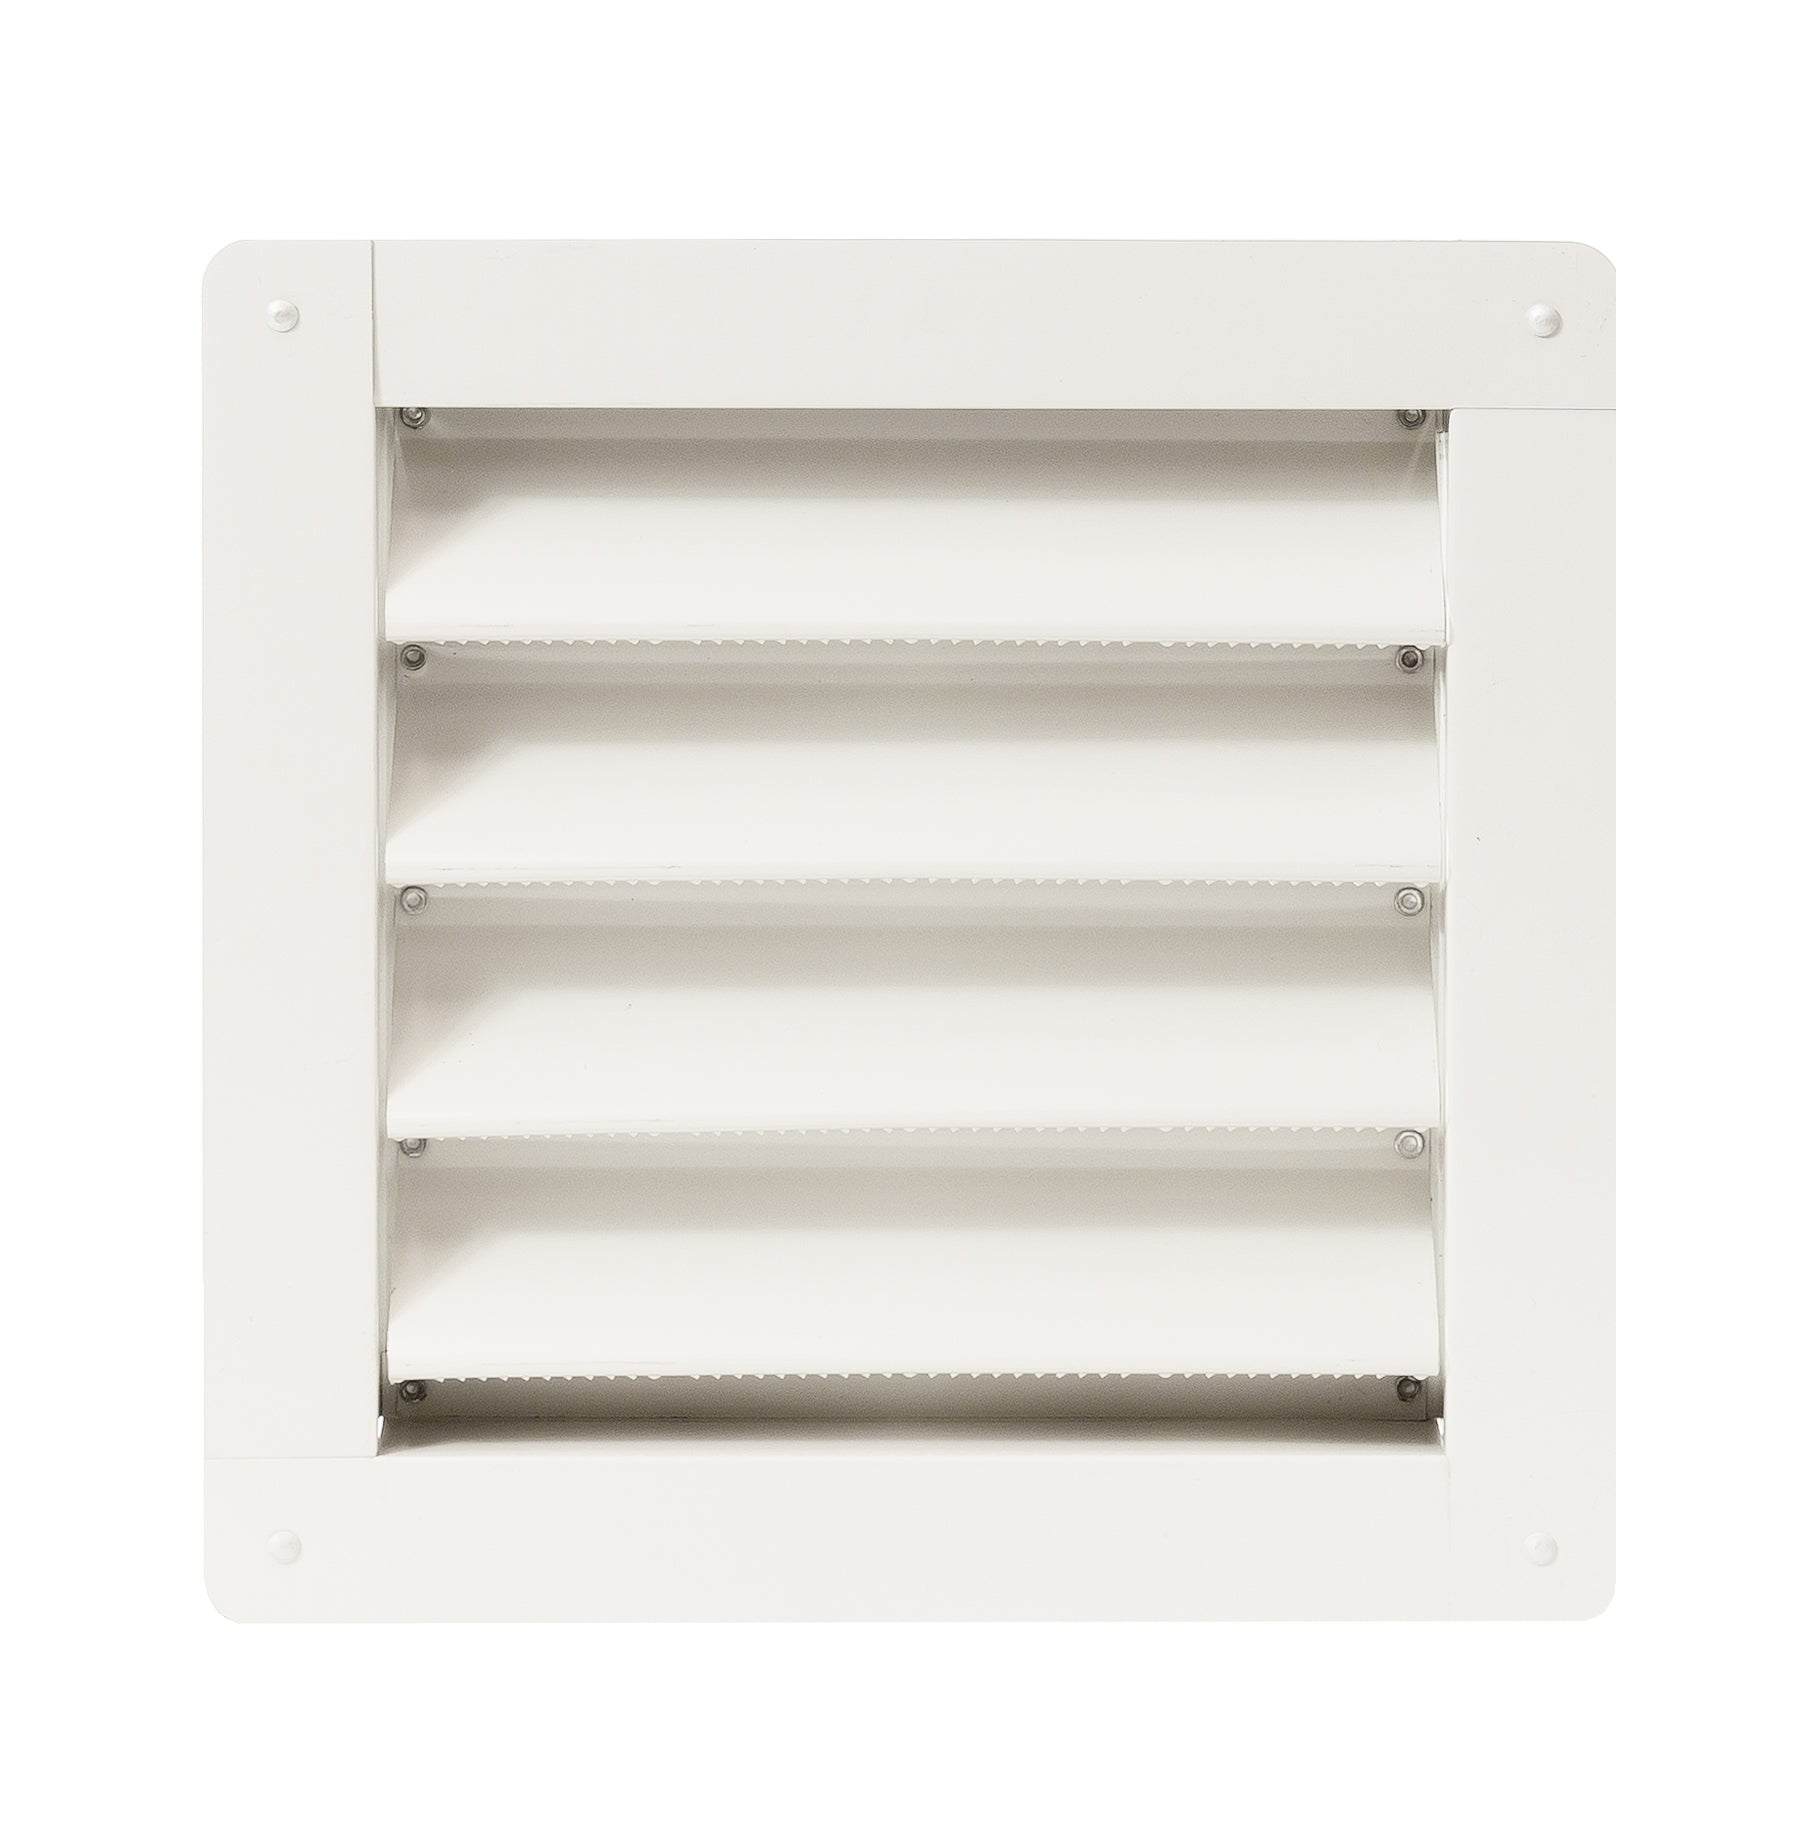 8" x 8" Flush Mount Aluminum White Wall Vent for Sheds, Playhouses, and MORE